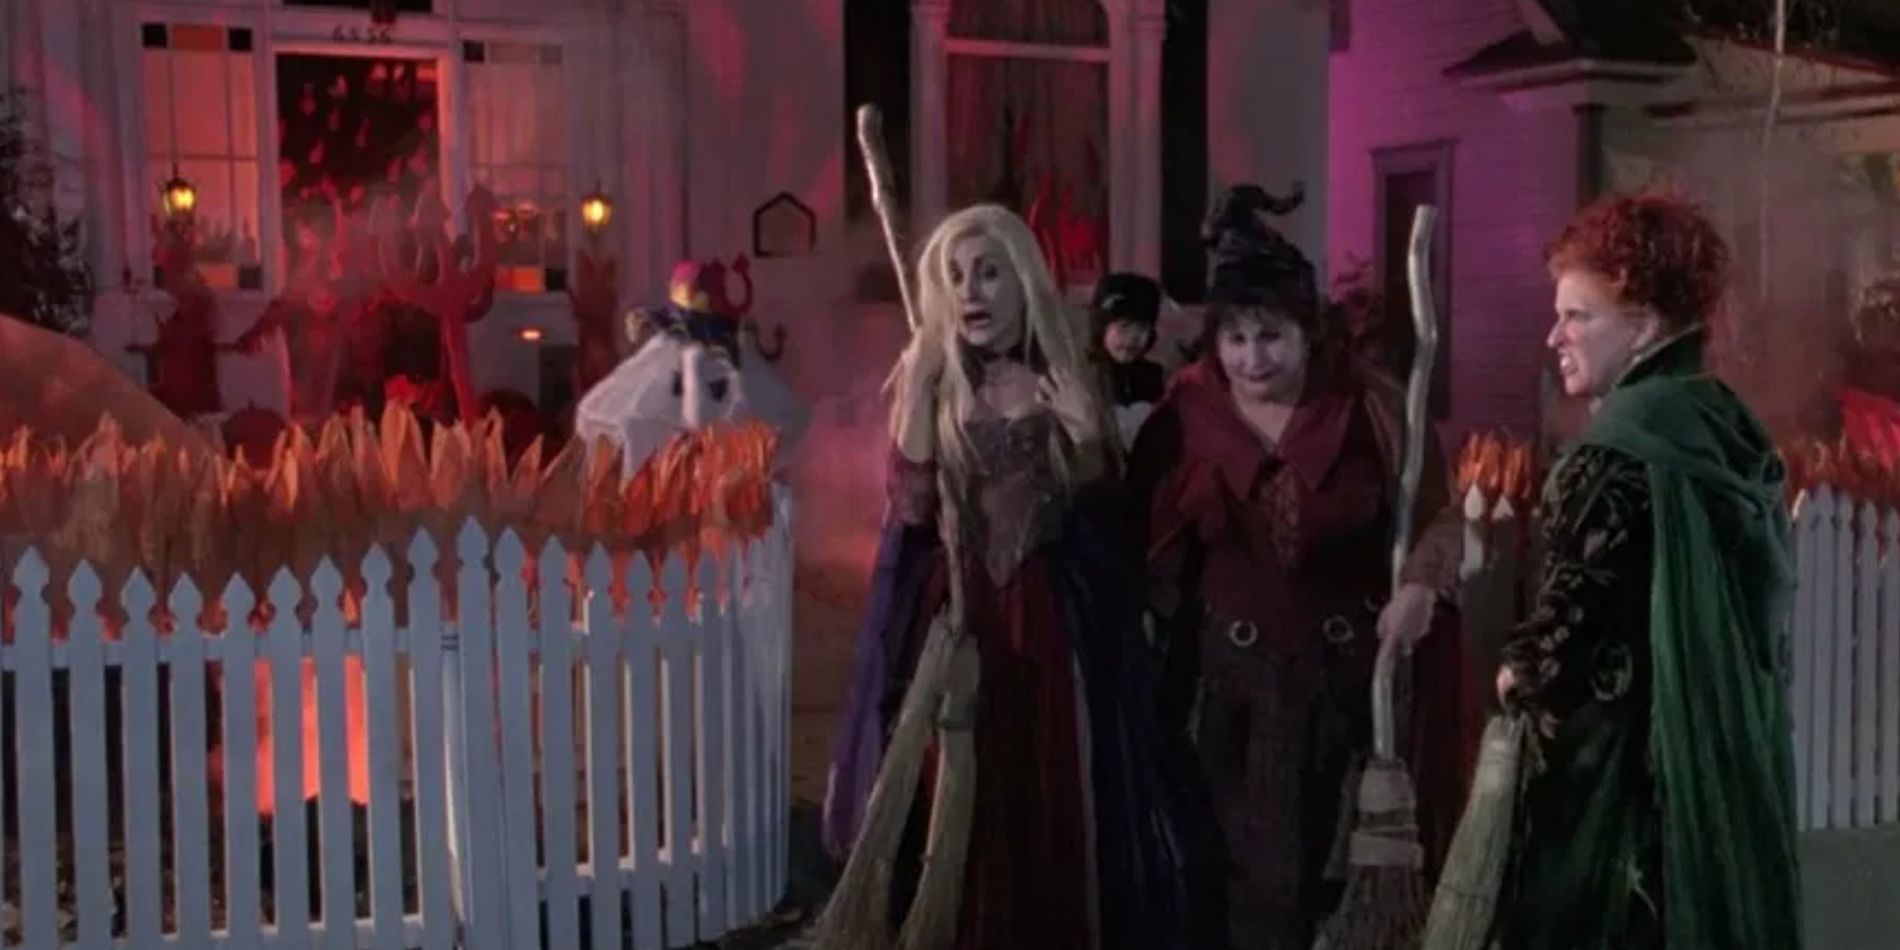 Sarah, Mary, and Winifred Sanderson outside a house while kids trick-or-treat in Hocus Pocus